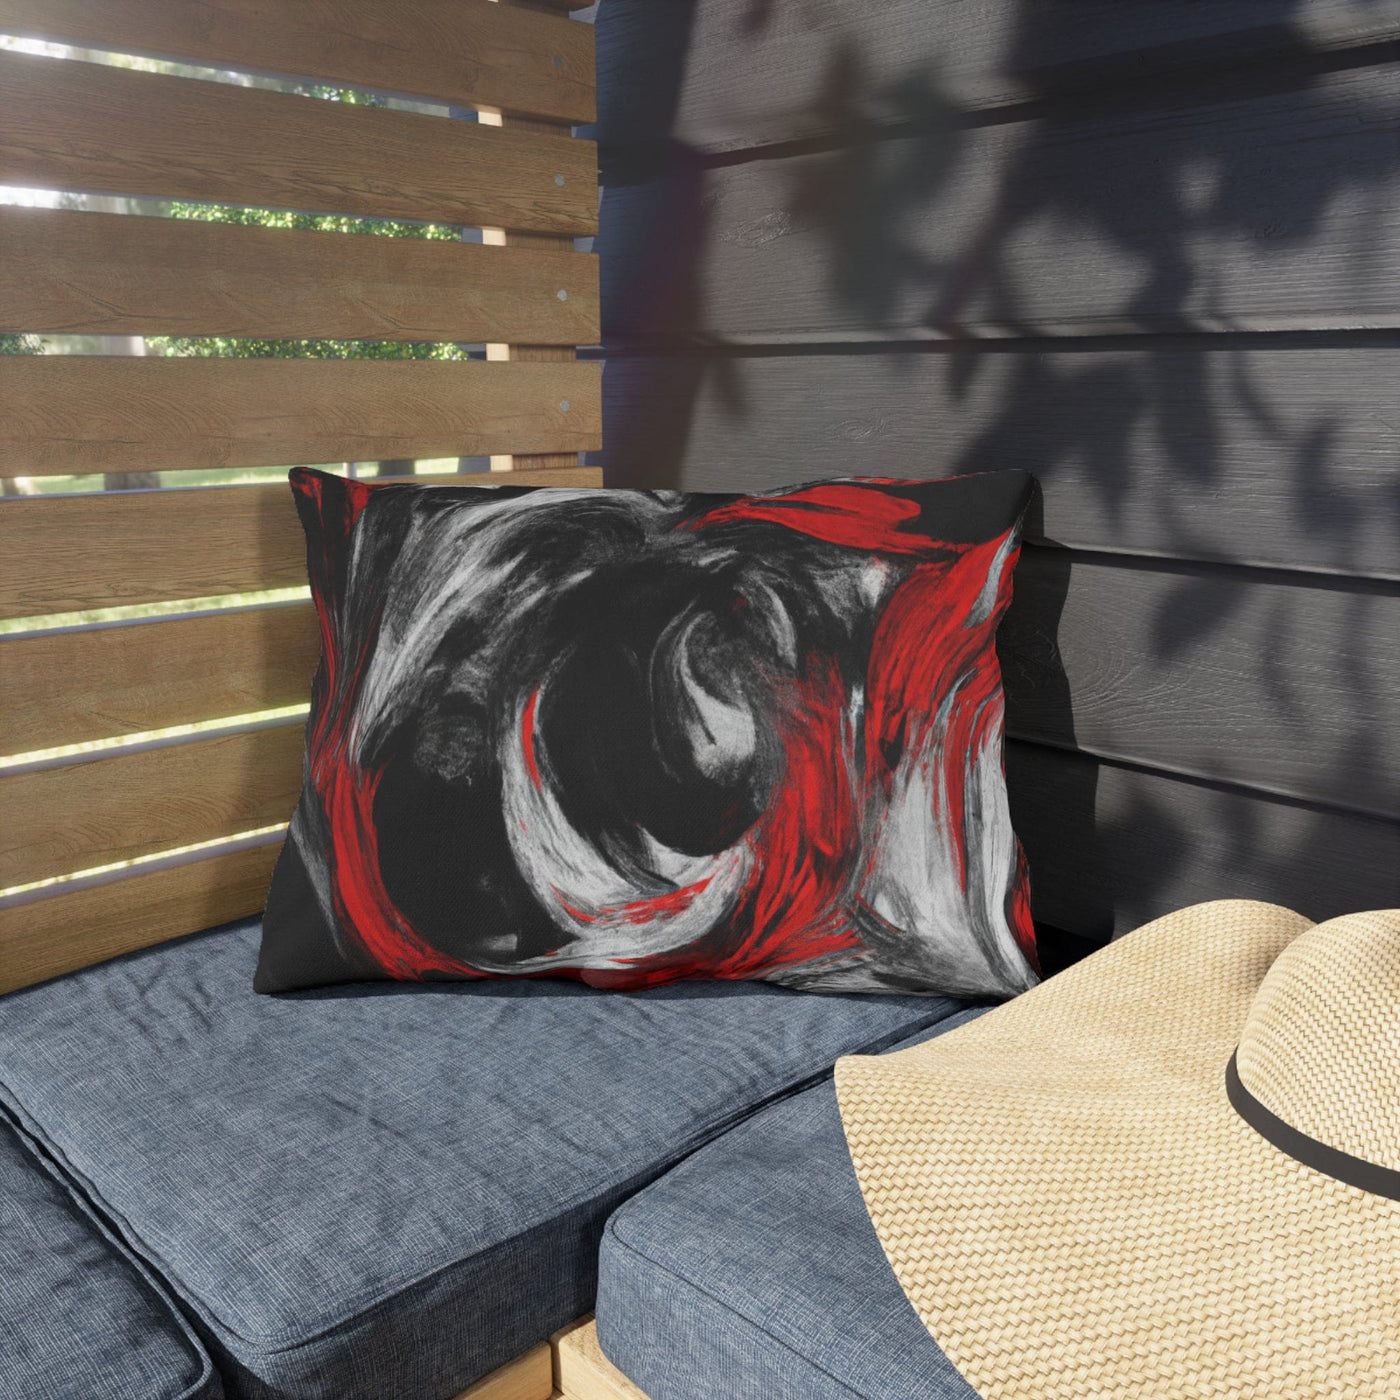 Indoor/outdoor Throw Pillow Decorative Black Red White Abstract Seamless